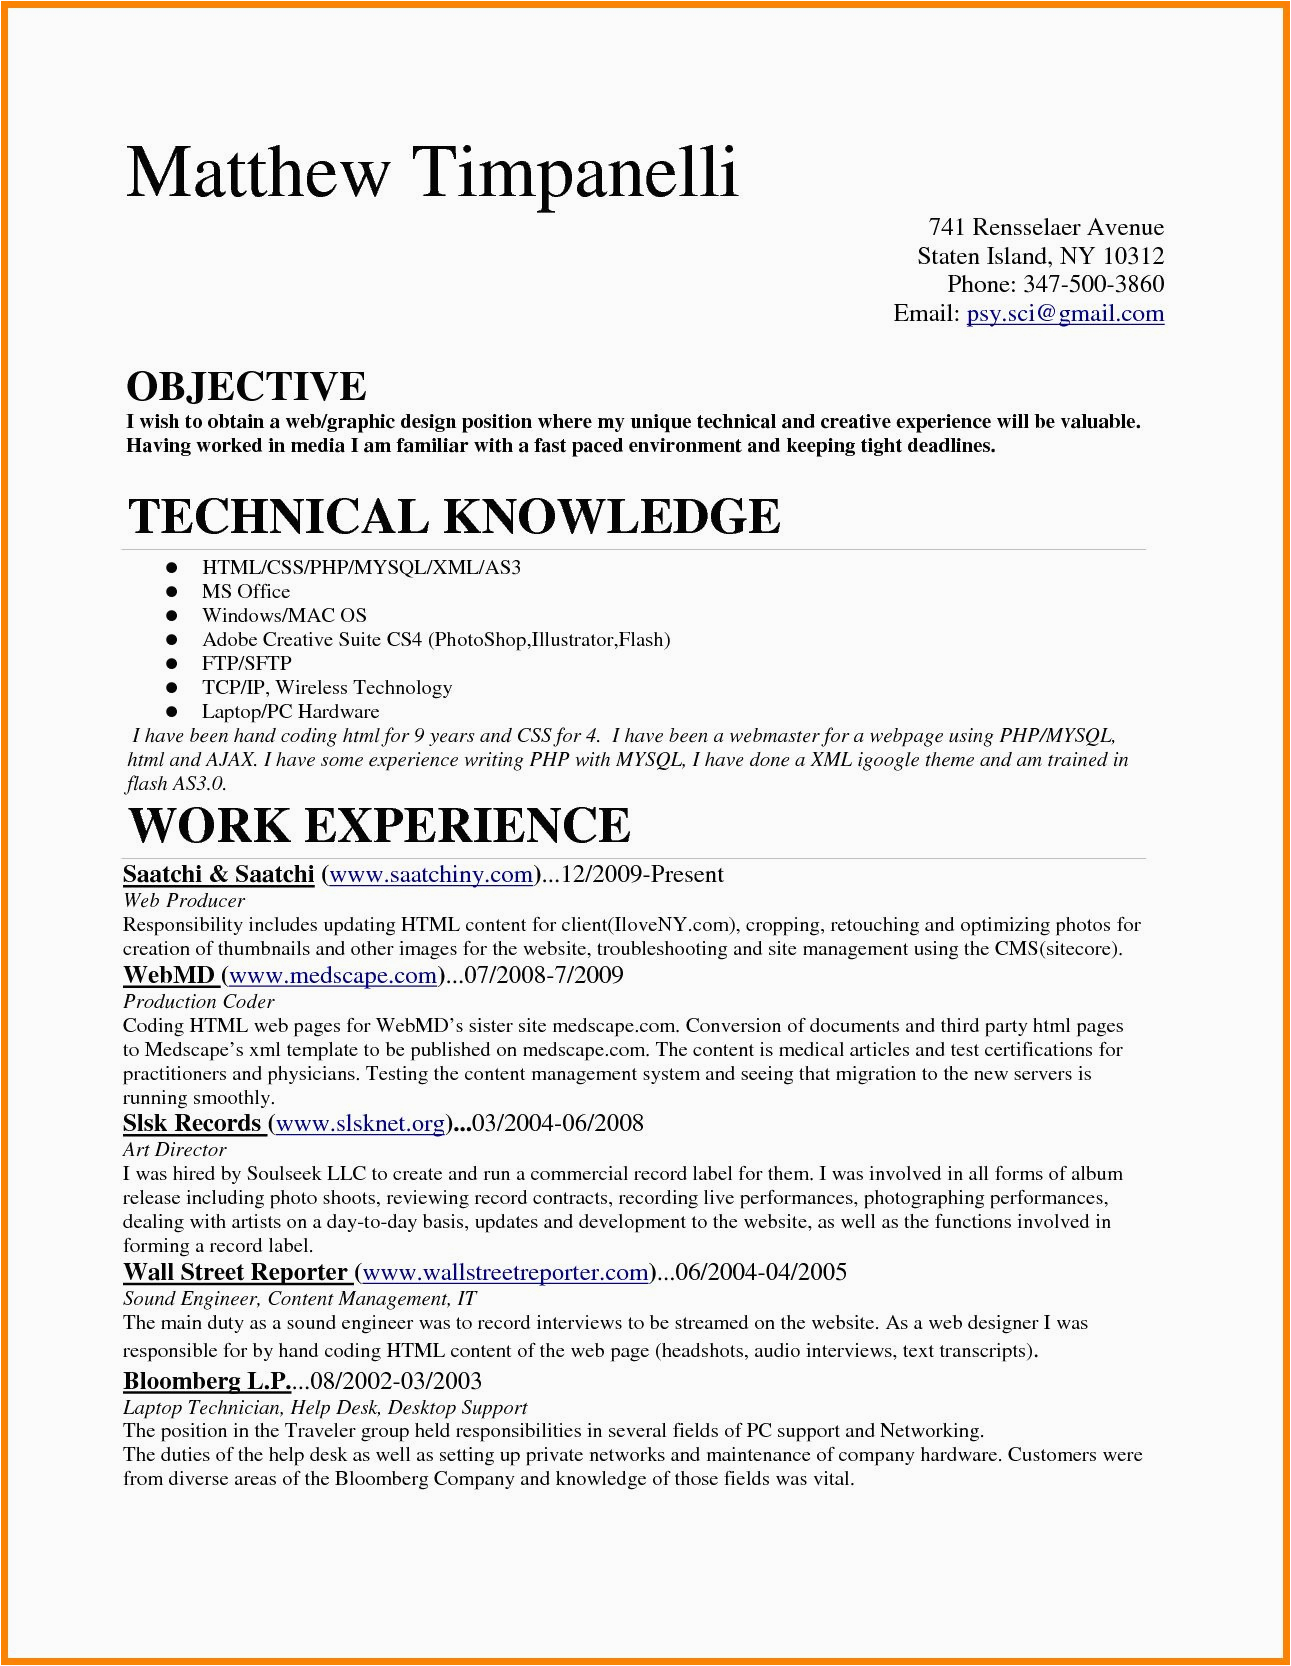 Sample Resume for Entry Level Medical Coder 23 Medical Coder Resume Examples In 2020 with Images